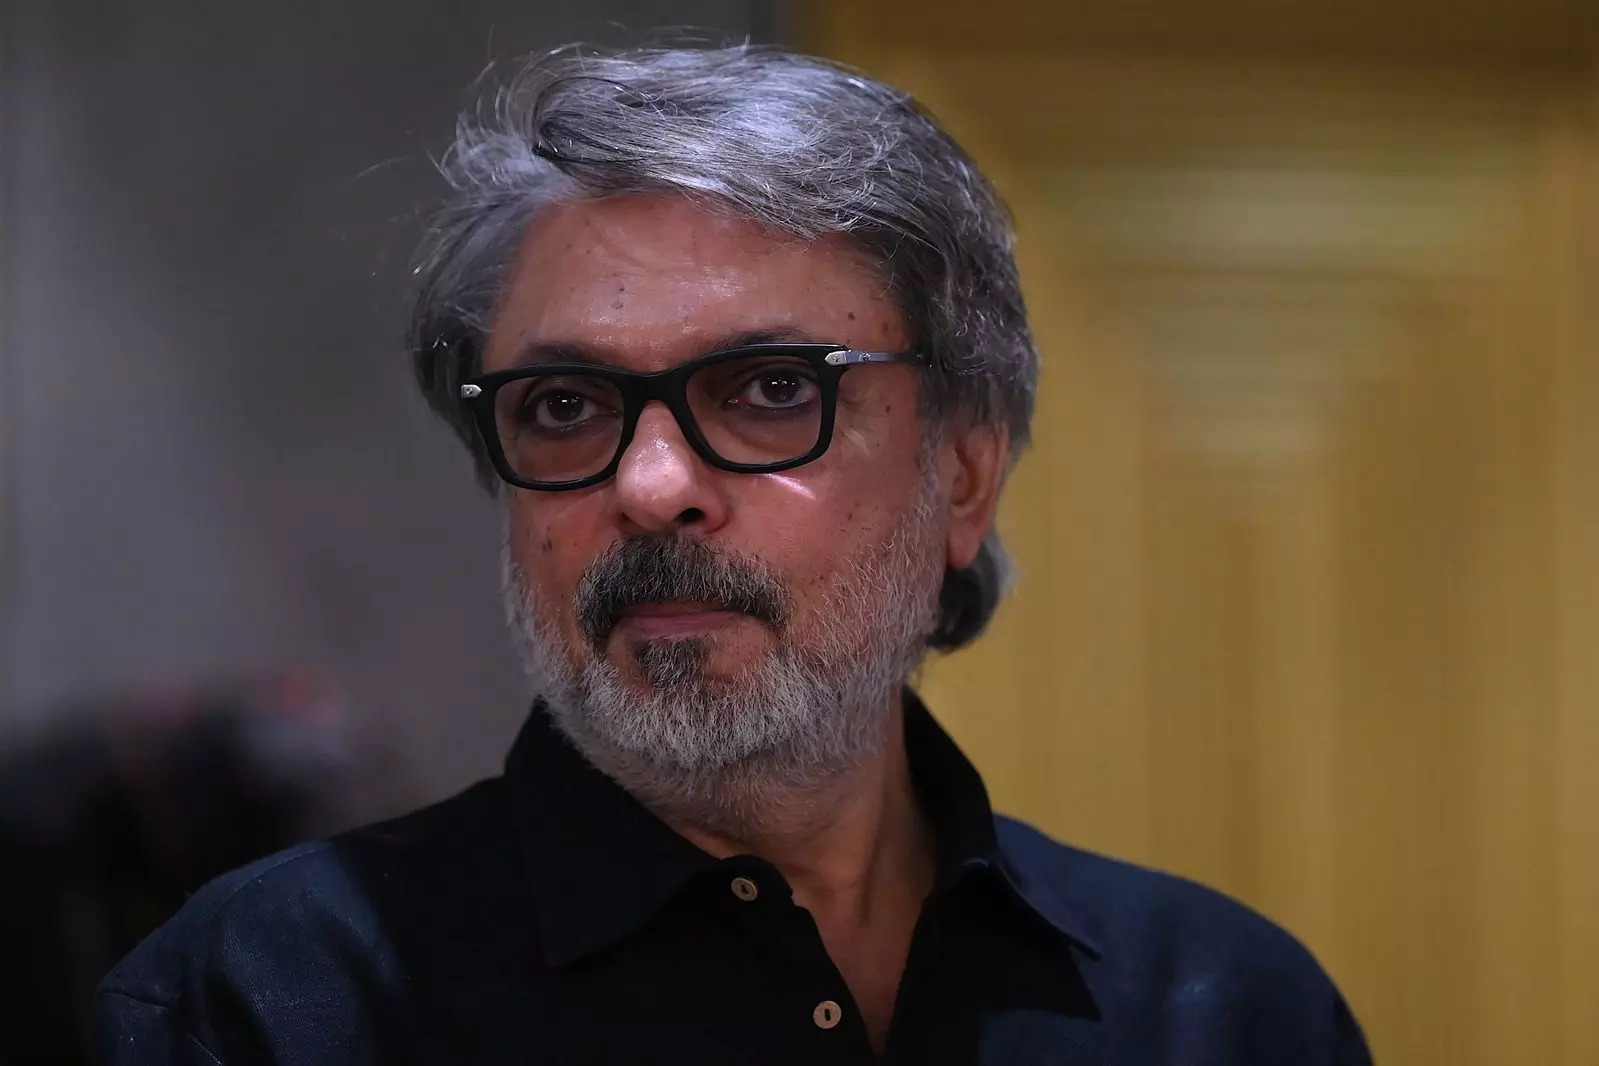 Bollywood director, screenwriter and music composer Sanjay Leela Bhansali  during an event of Netflix, in Mumbai on February 18, 2023. (Photo by SUJIT JAISWAL / AFP)